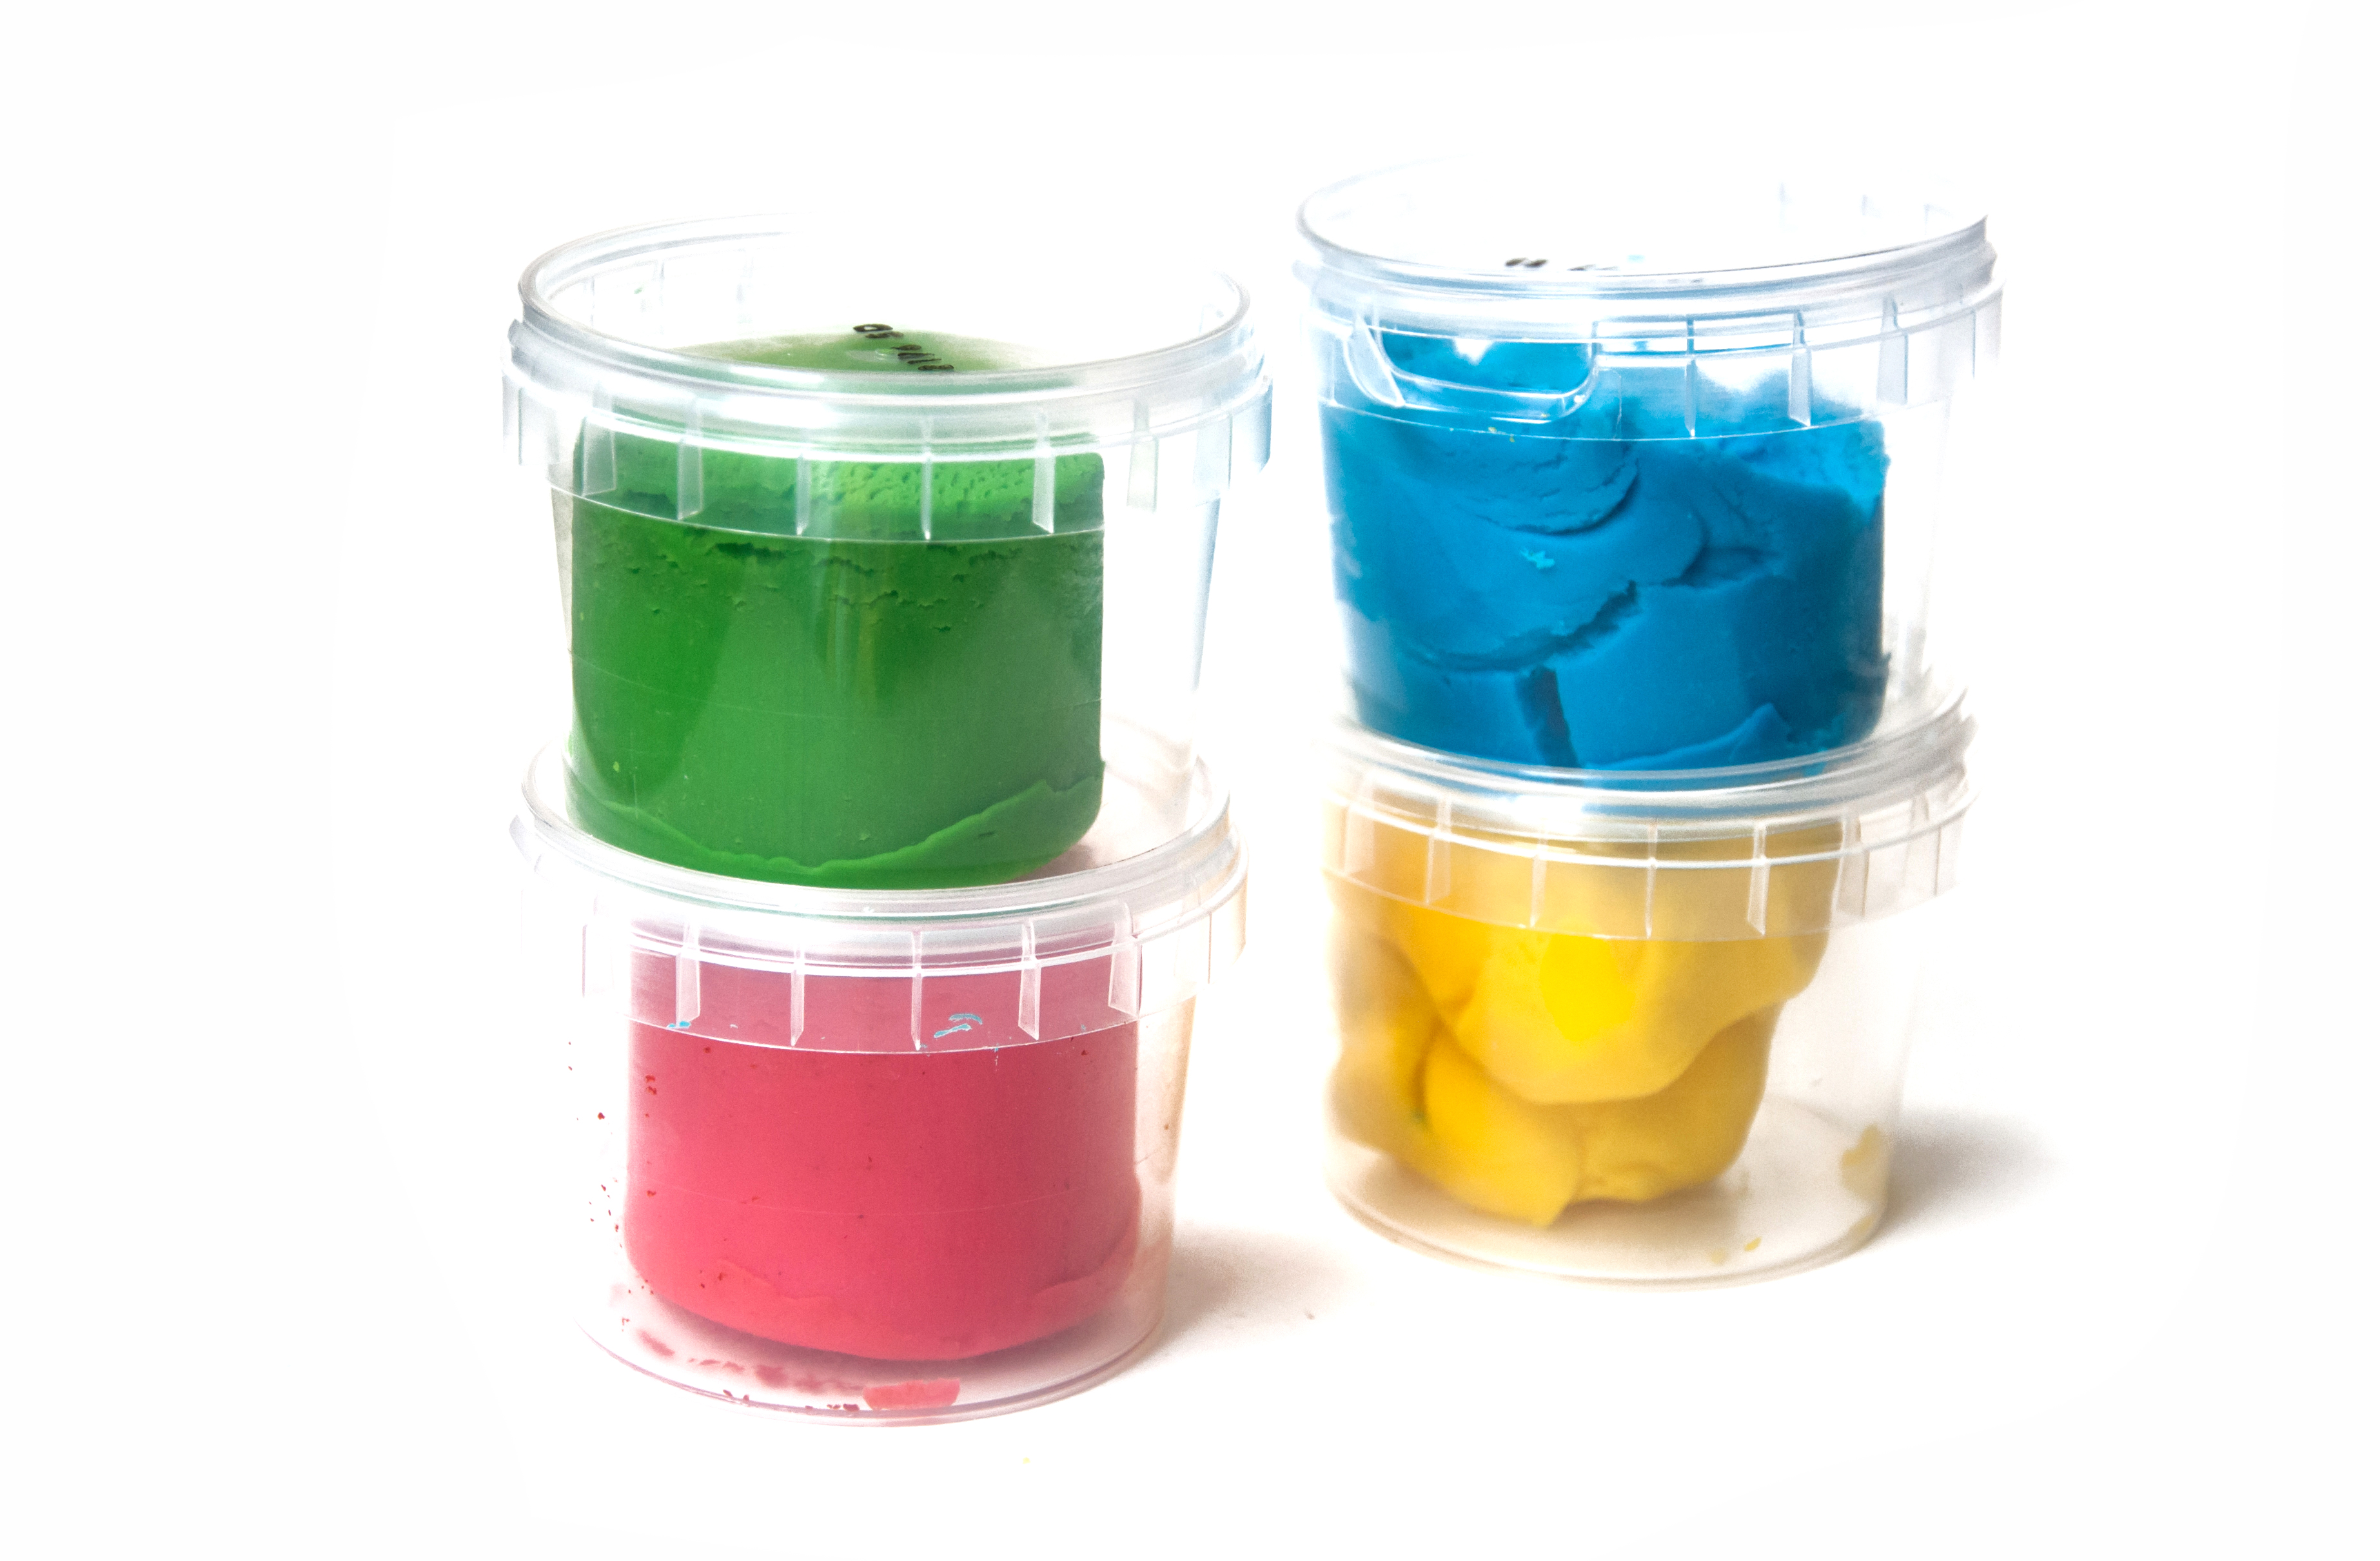 Playdoh children's clay, Objects, Isolated, Jar, Kid, HQ Photo